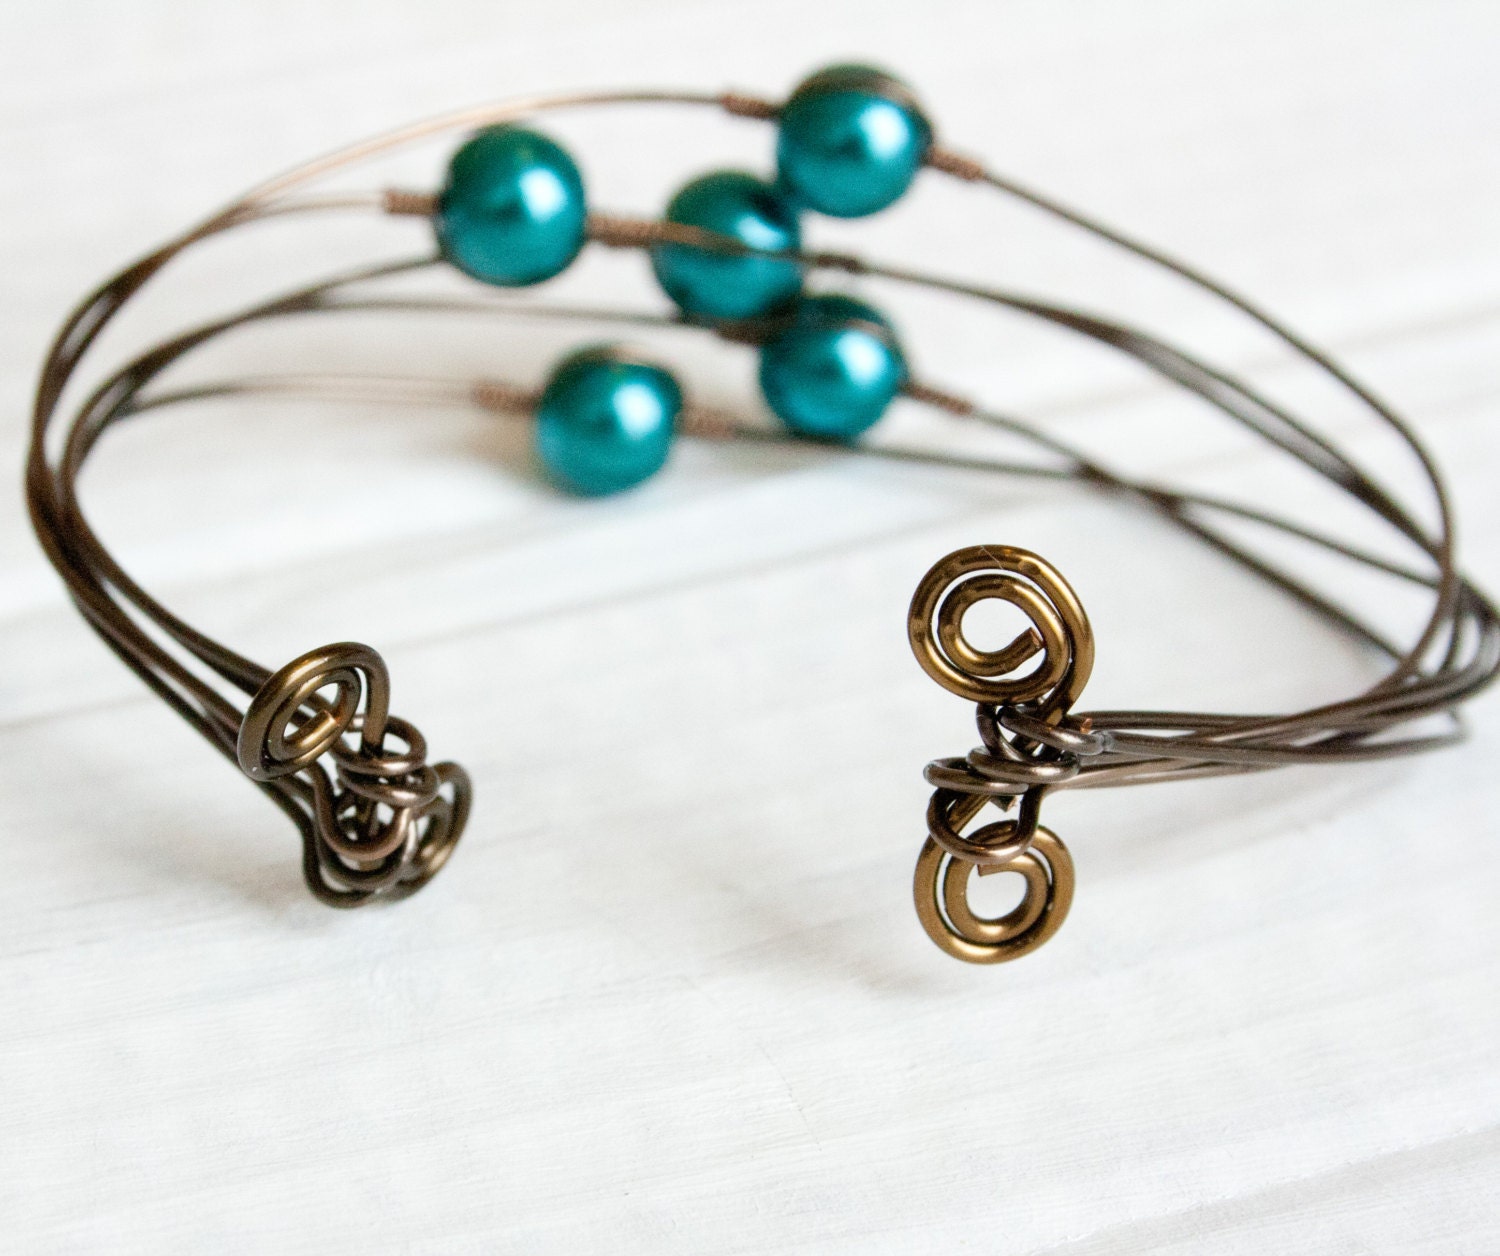 Teal and Bronze Pearl Bangle Cuff Bridesmaid Jewelry Wedding - Etsy